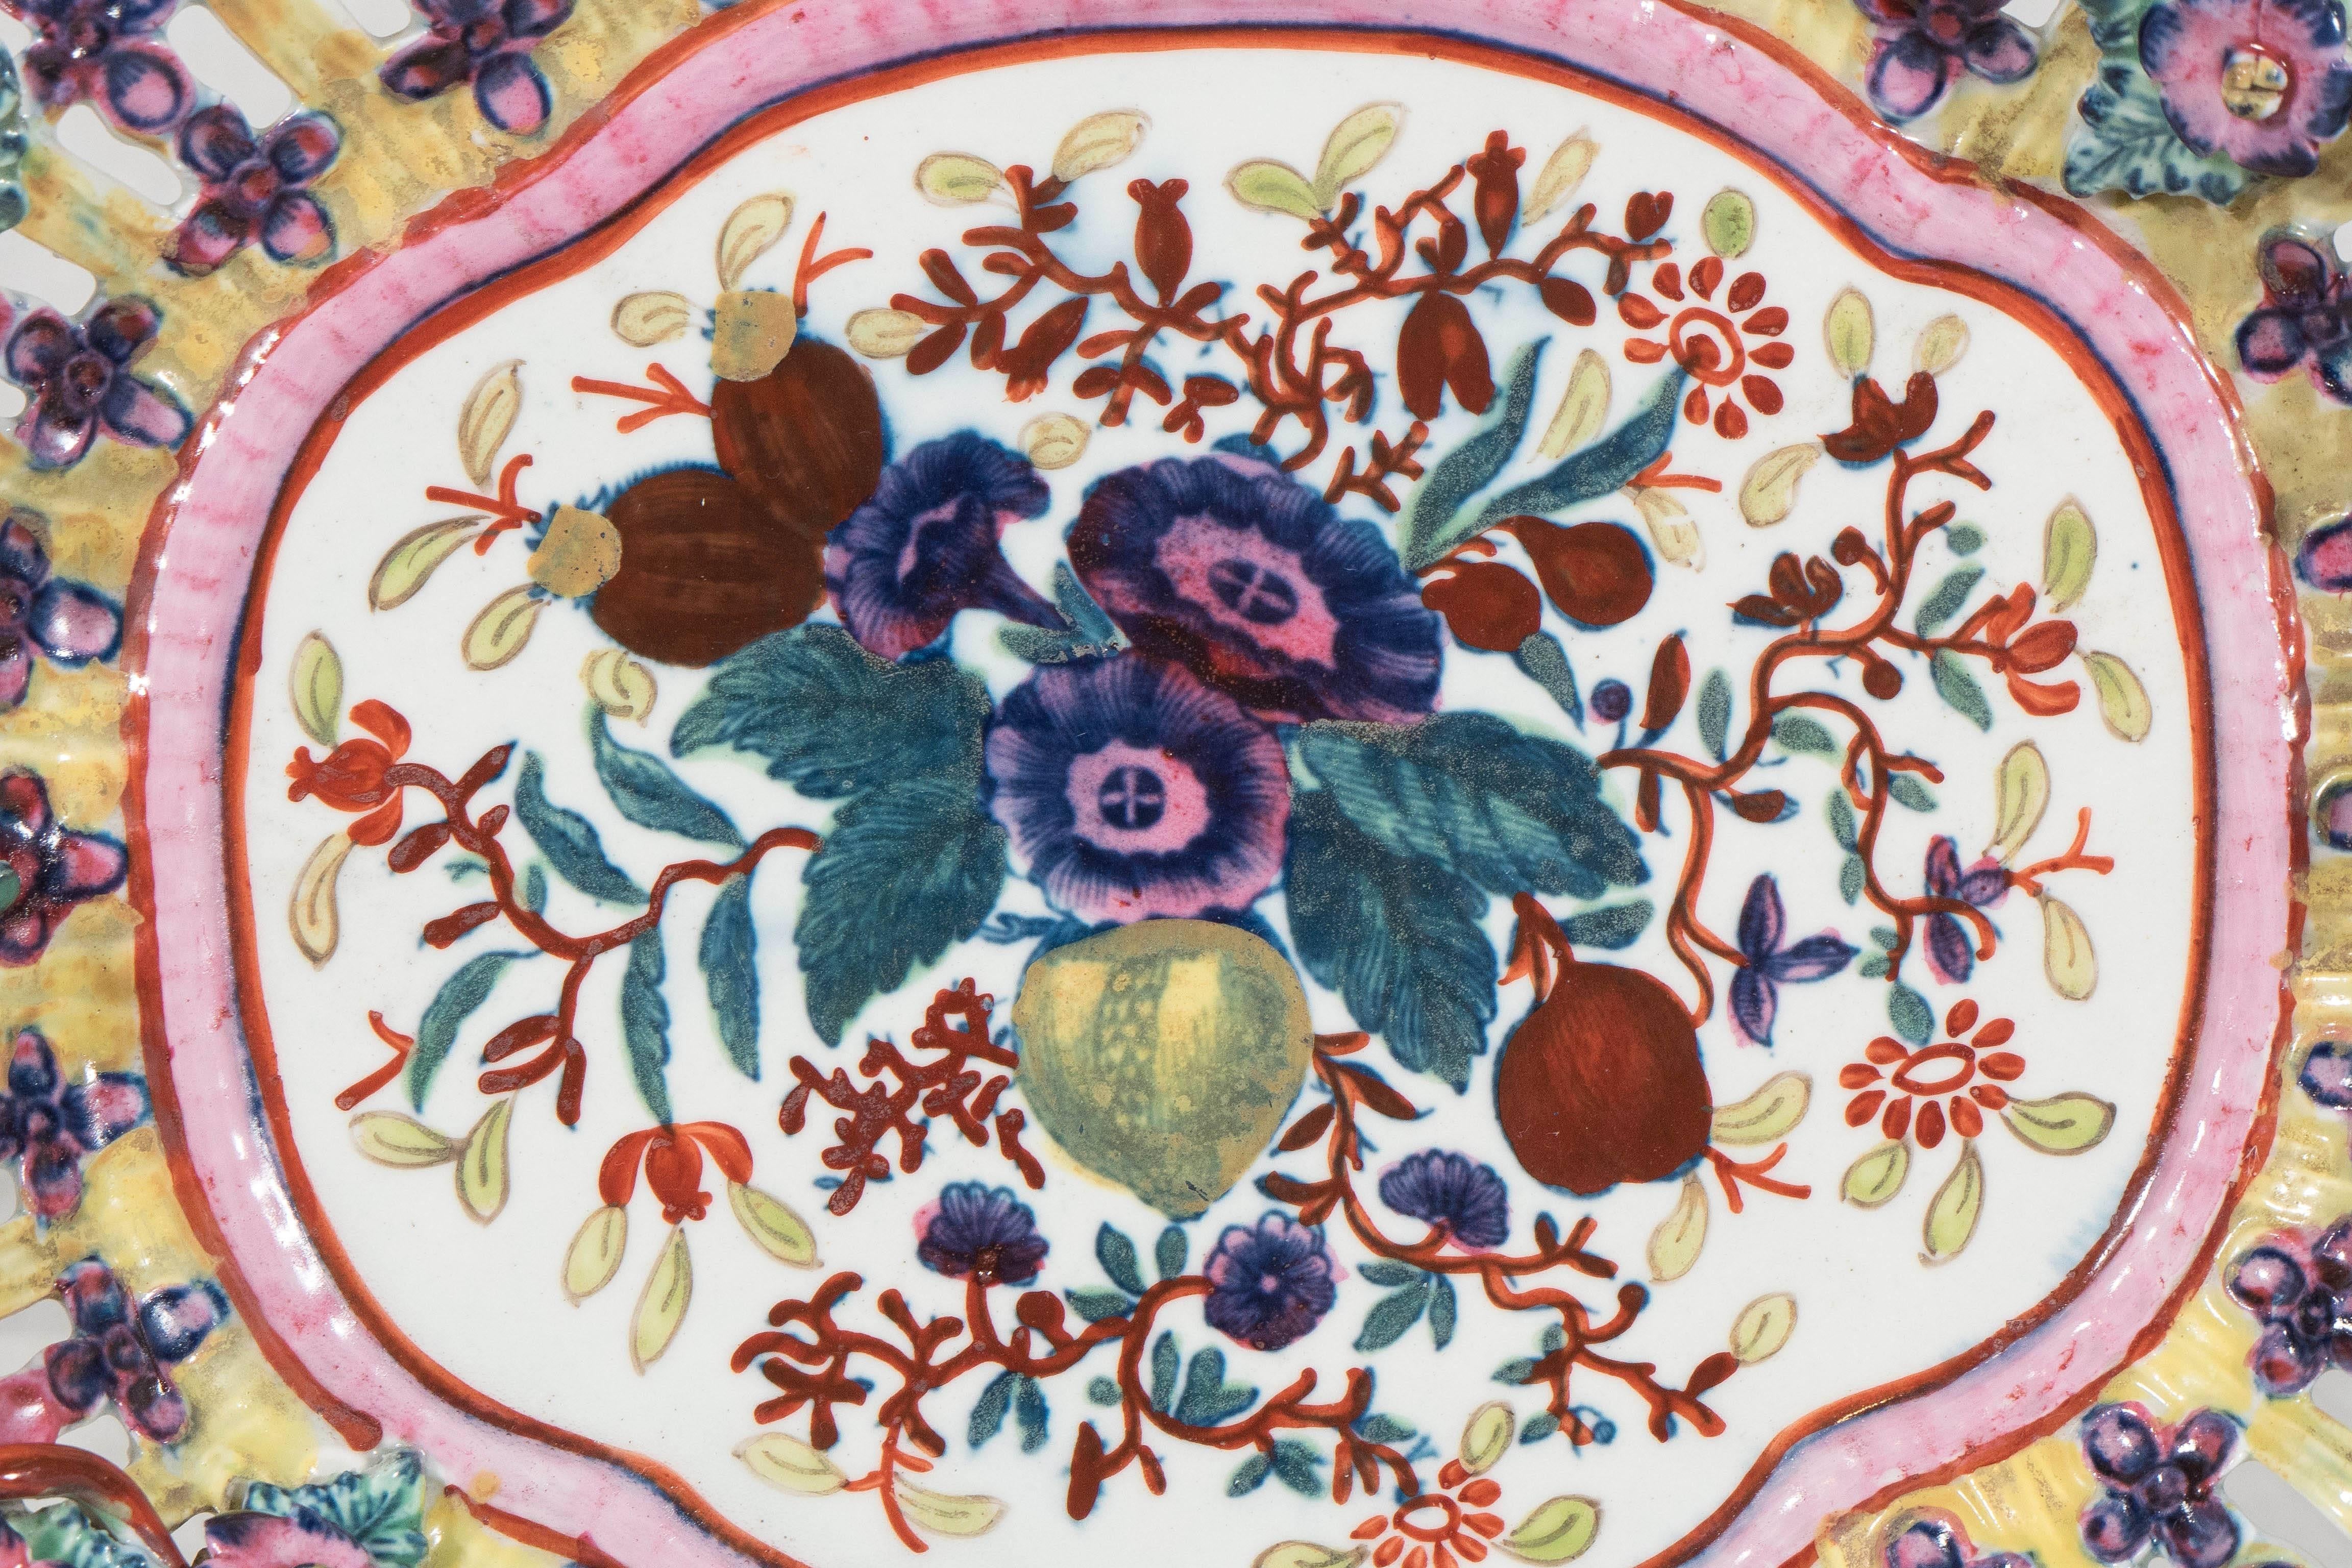 When one thinks of first period Worcester porcelains the very popular blue and white printed porcelains often come to mind. But, in the first period the Worcester factory also made wonderful pieces in colorful polychrome like this pierced dish.